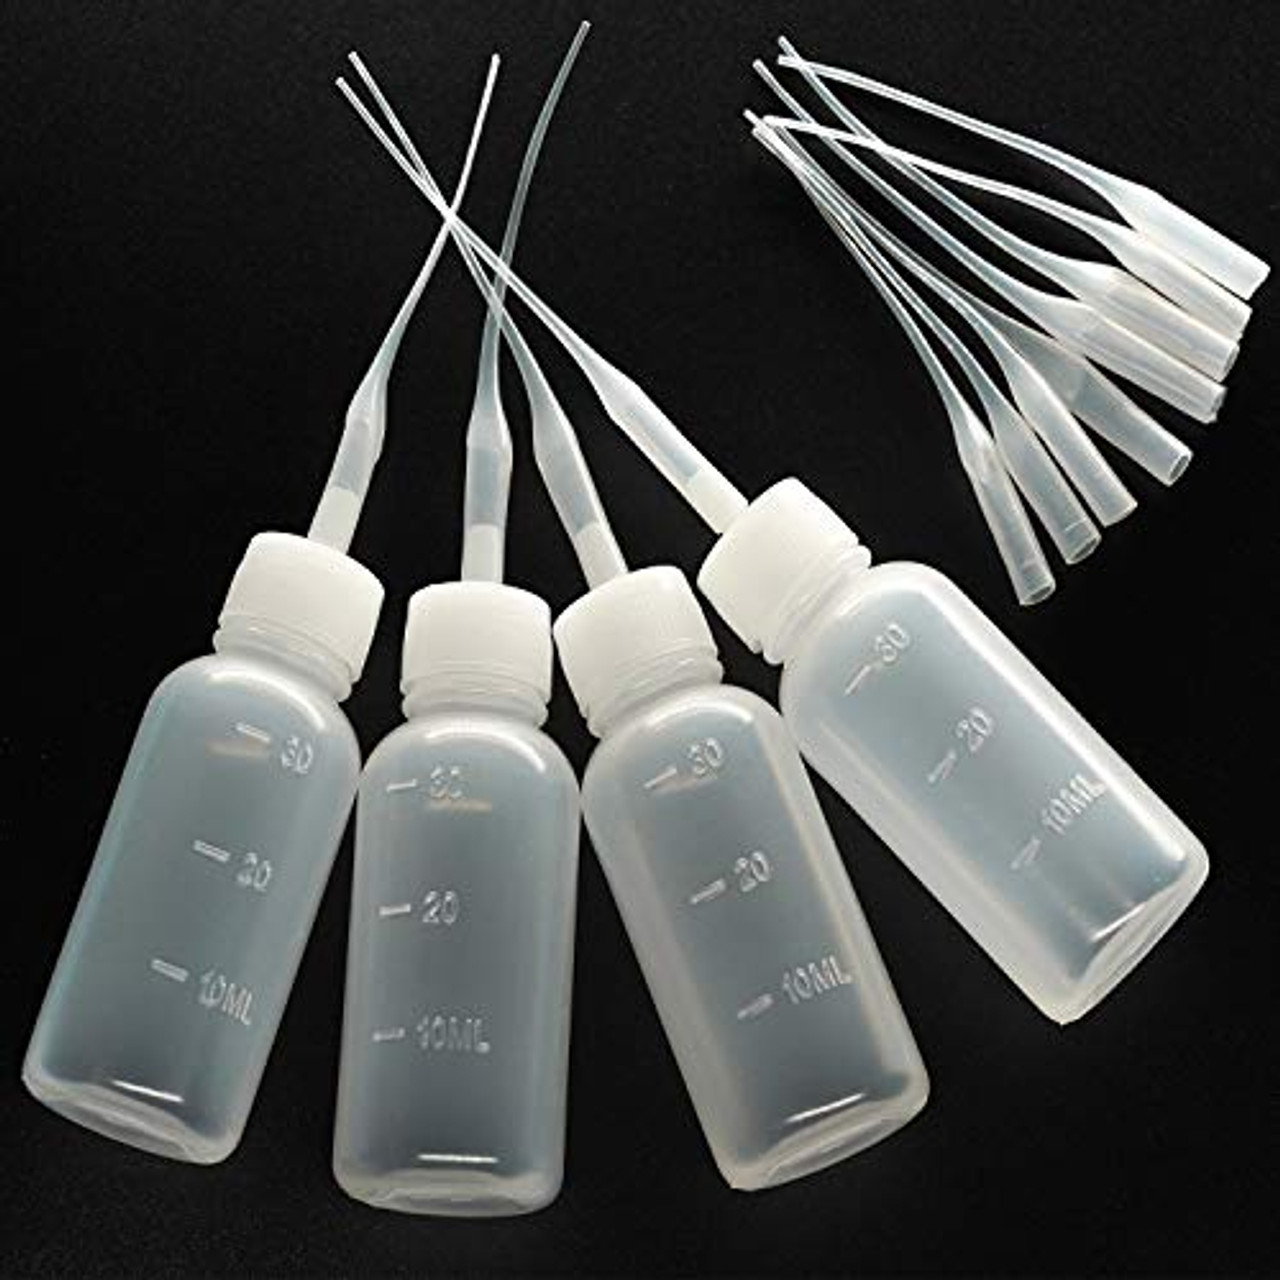 Expesumas 6 Pcs Glue Applicator Bottles 30ml Plastic Squeezable Dropper  Bottles with Blunt Needle Tip 14ga 16ga 18ga 20ga for Glue Applications  Paint Quilling Craft and Oil